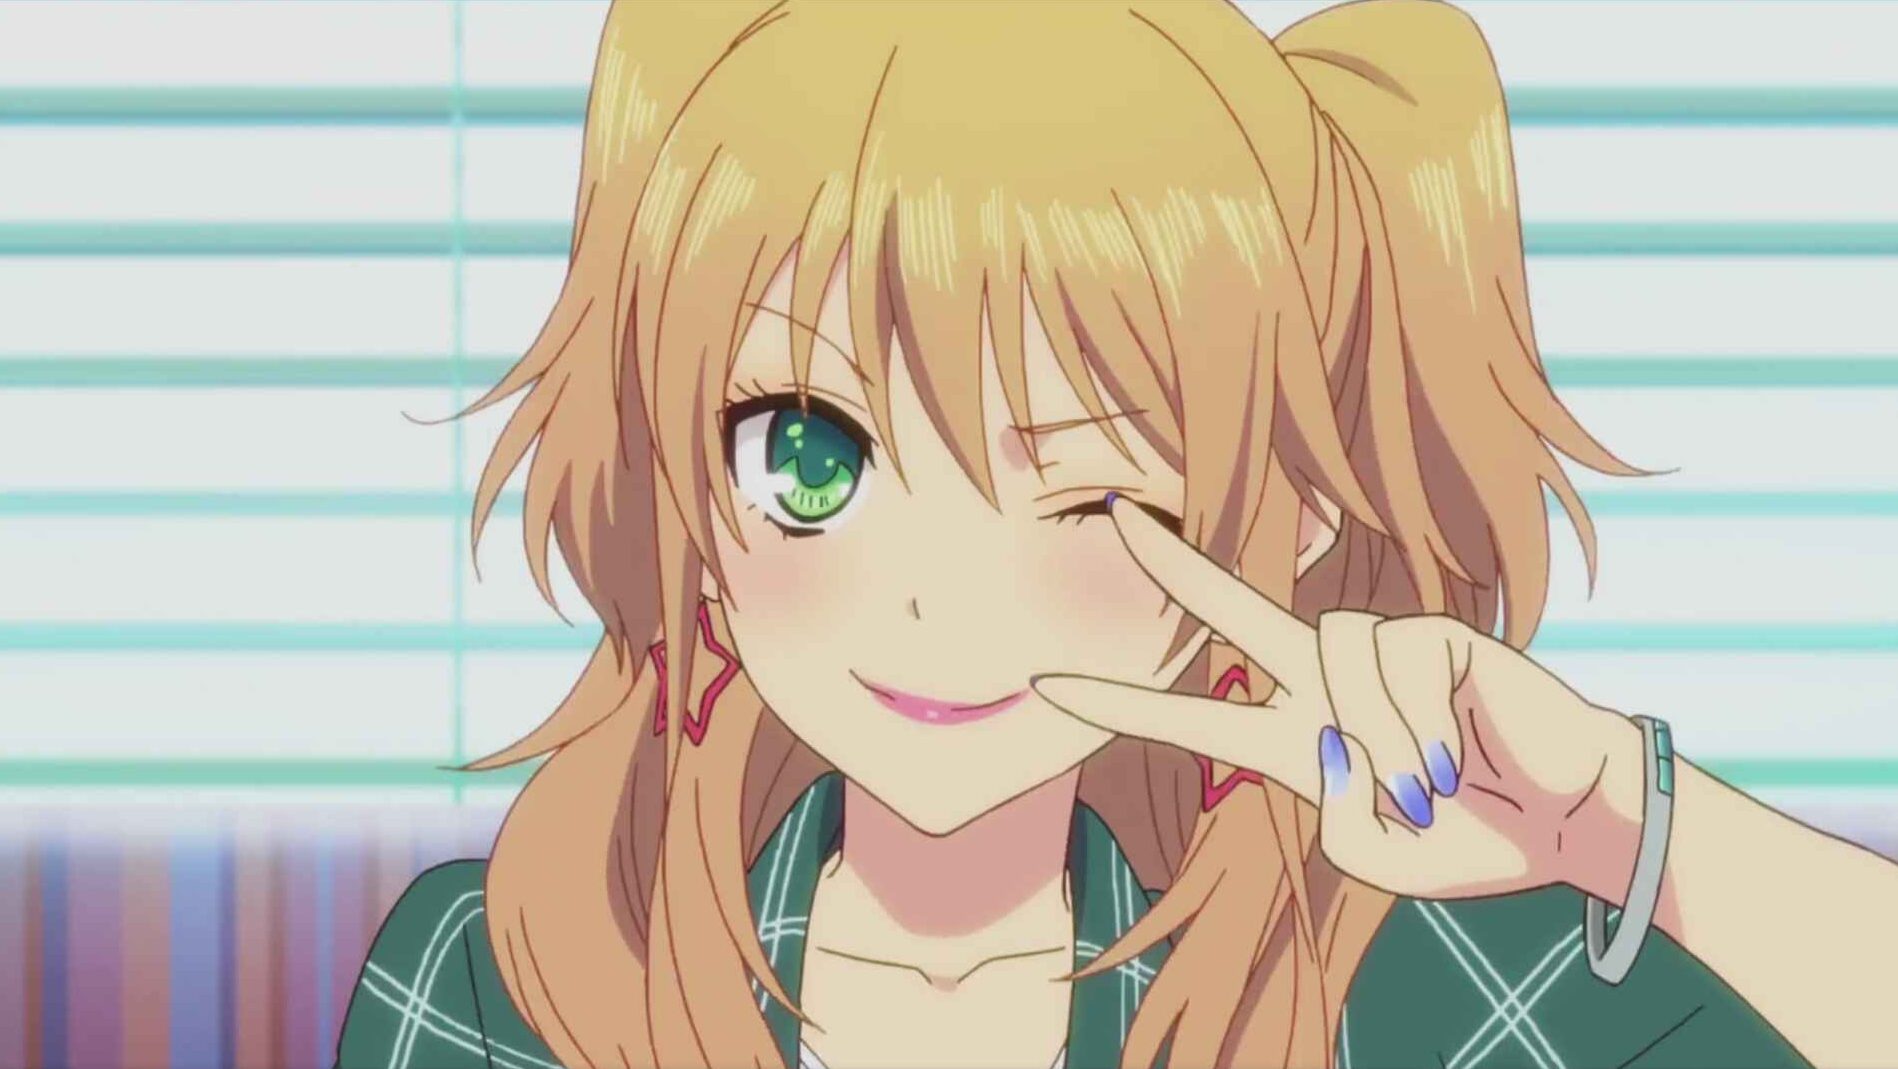 Yuzu Aihara from Citrus, is more than just a pretty face